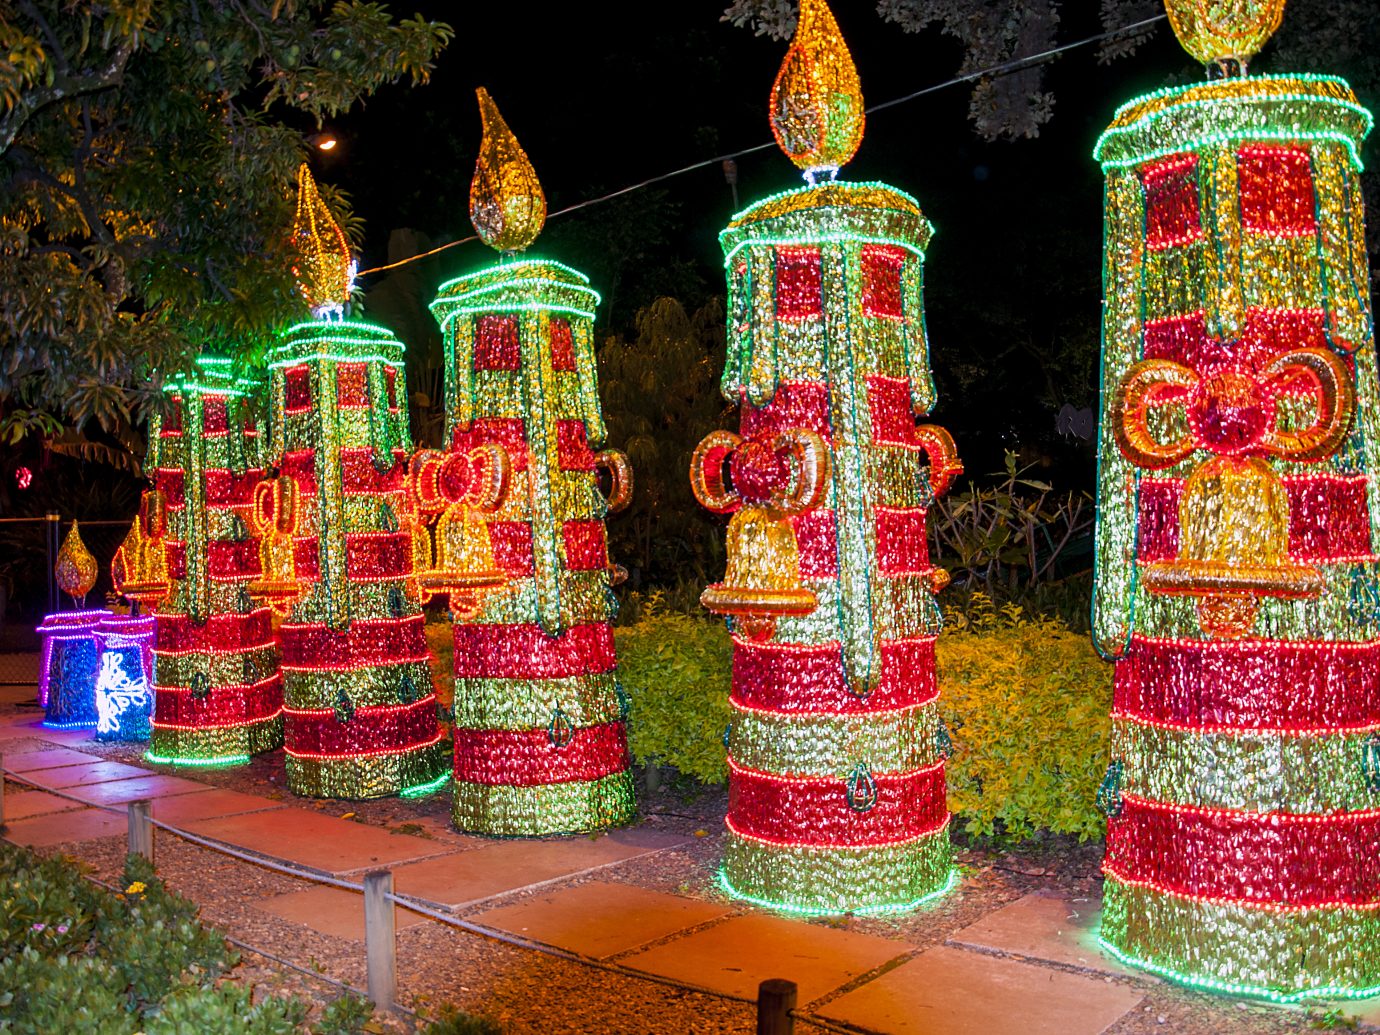 Some Christmas decoration at the North Park (Parque Norte) in Medellin, Colombia